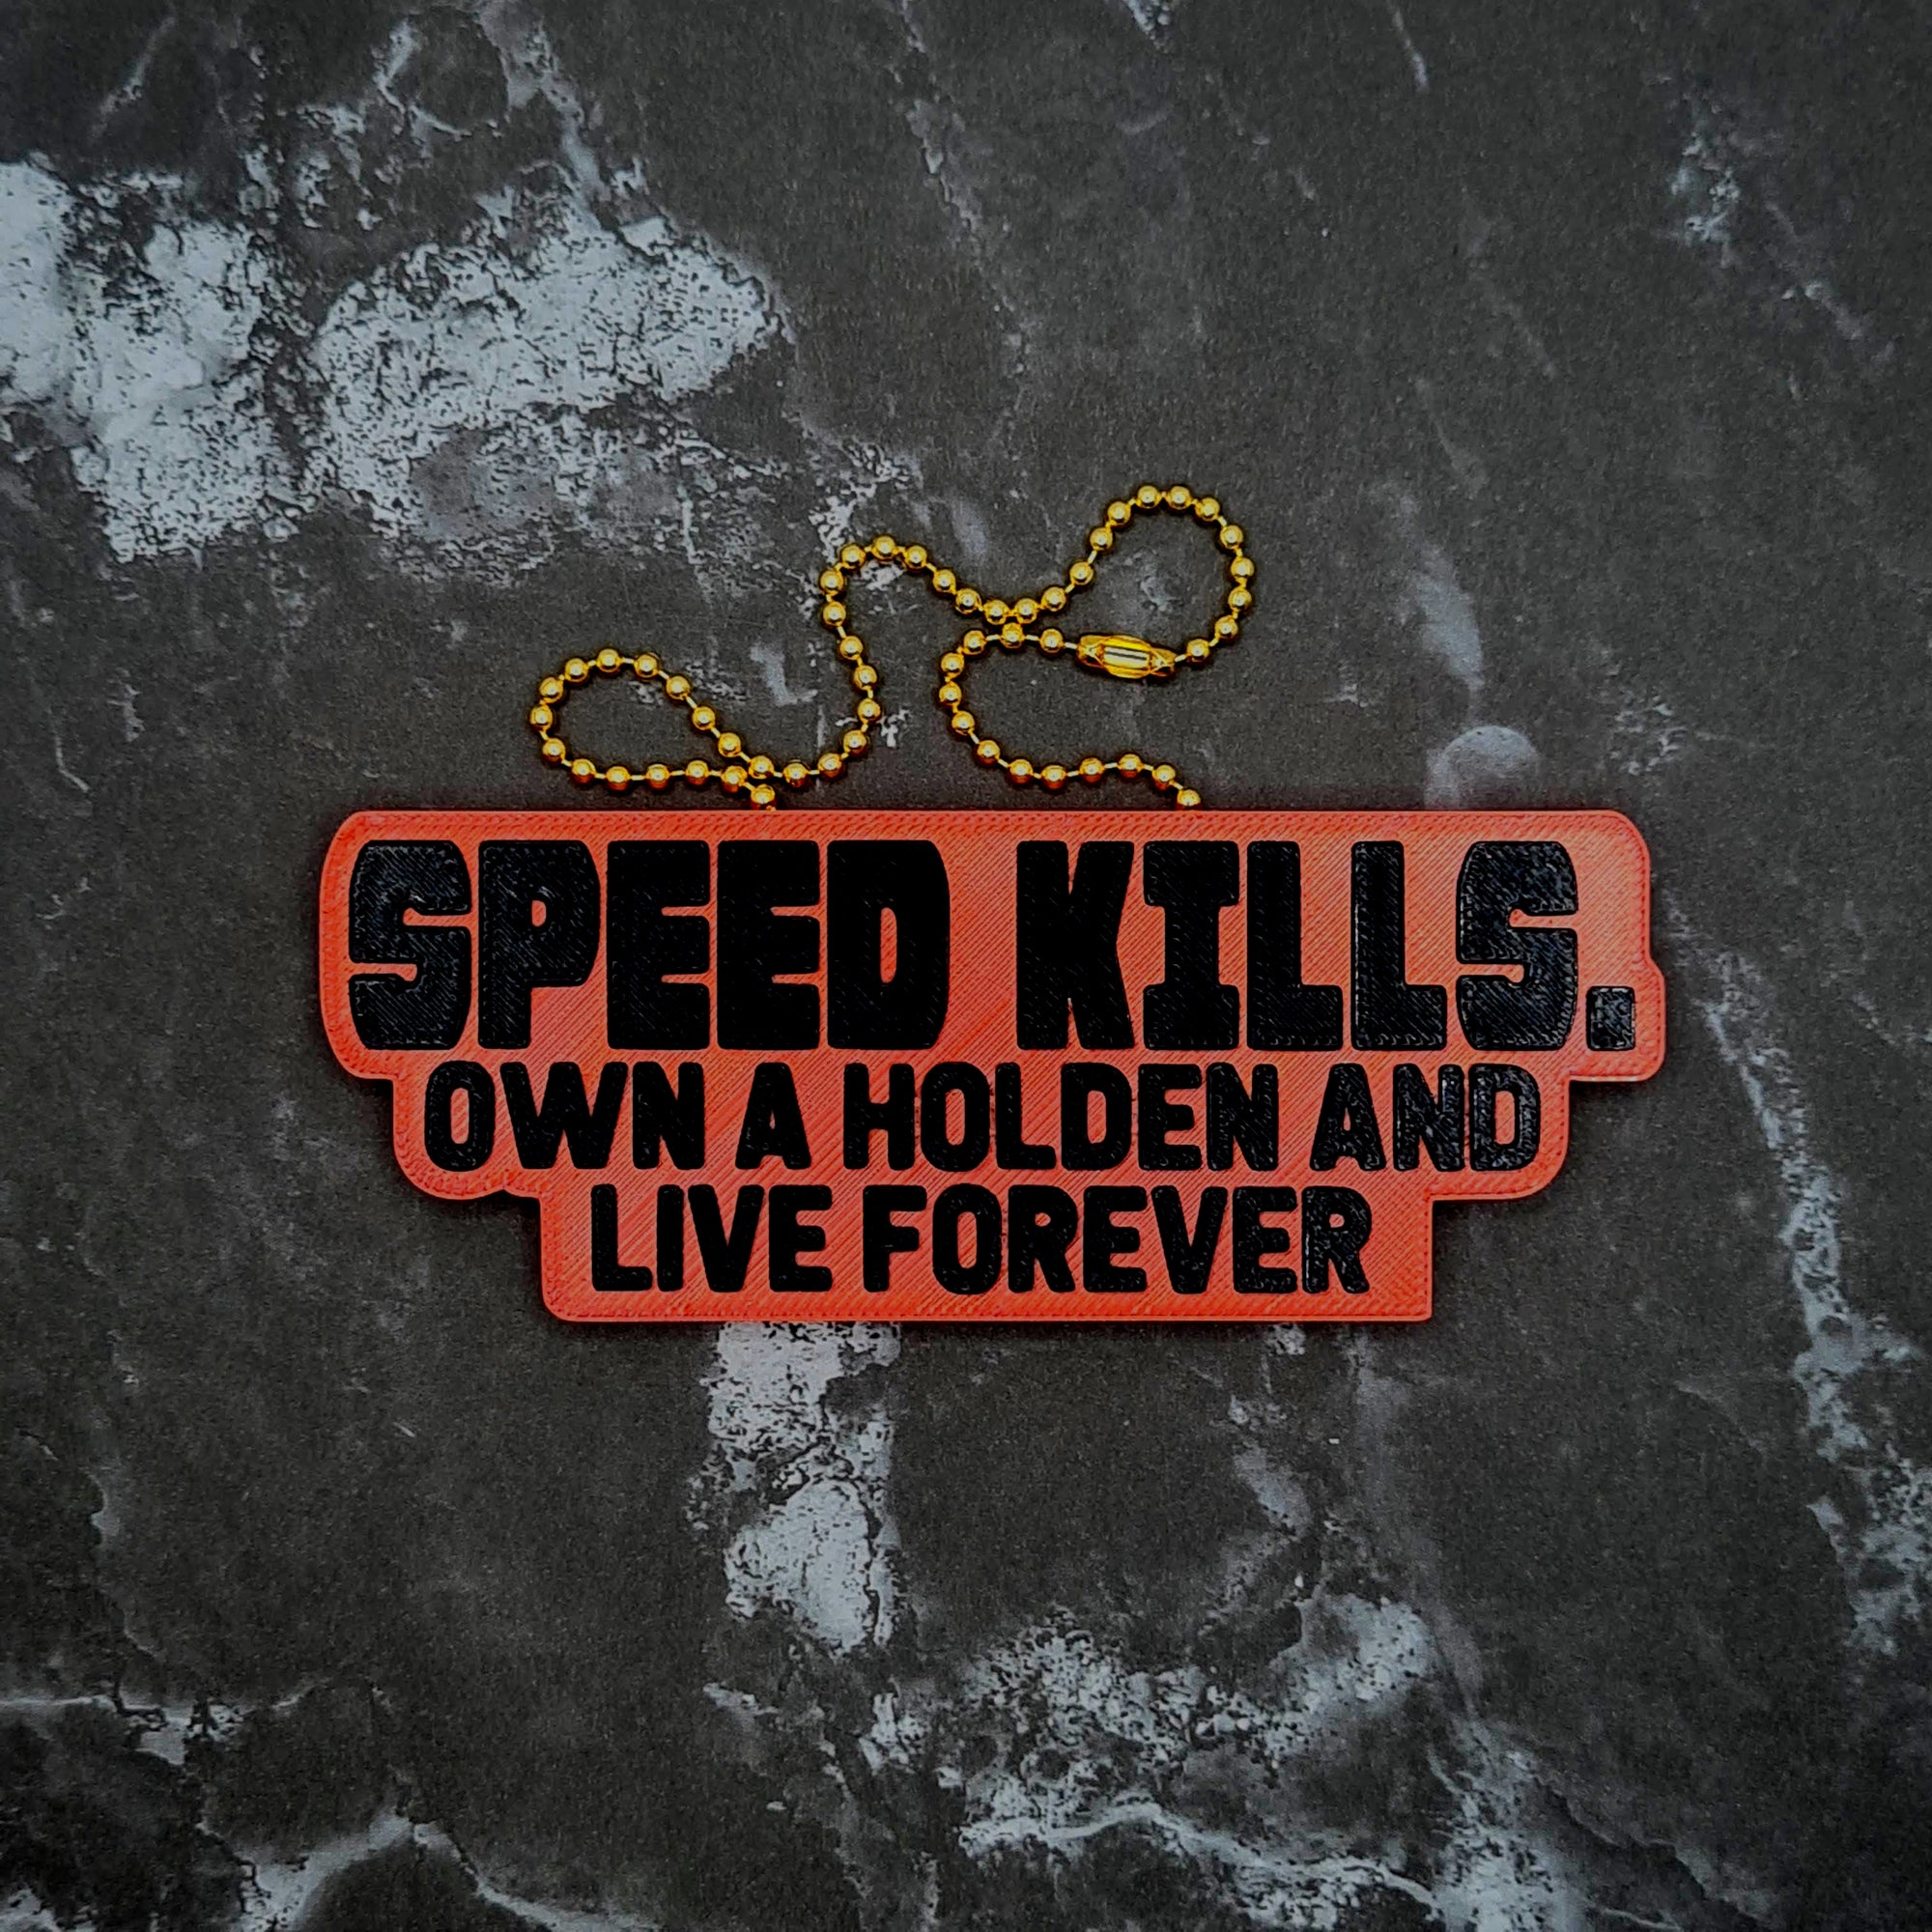 Speed Kills, Drive a Holden and Live Forever Charm!